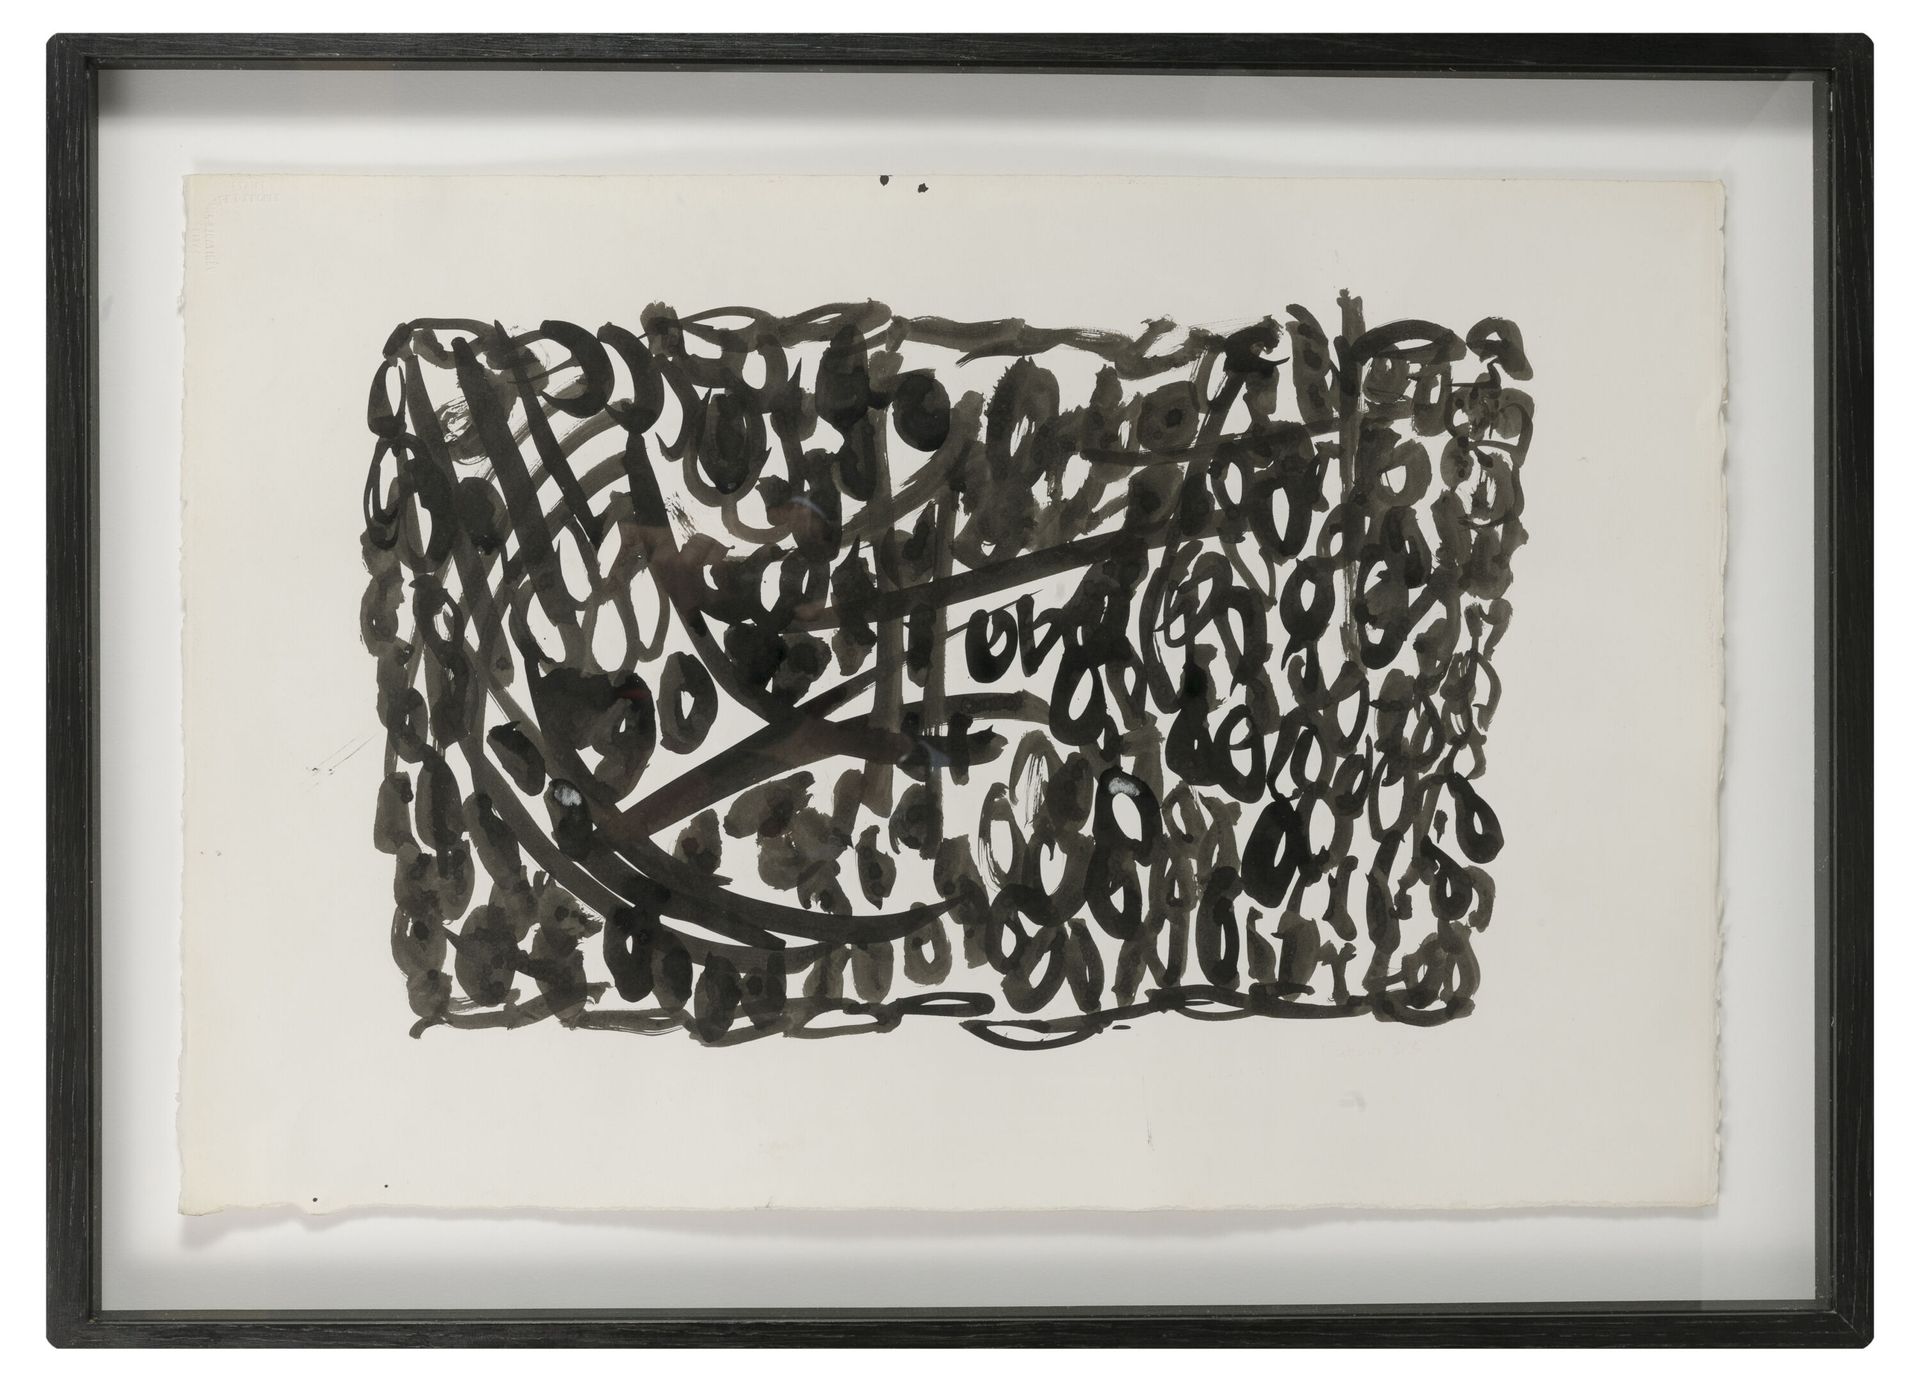 MICHEL CADORET (1912-1985) Untitled, 1963.

Ink on paper.

Signed and dated lowe&hellip;